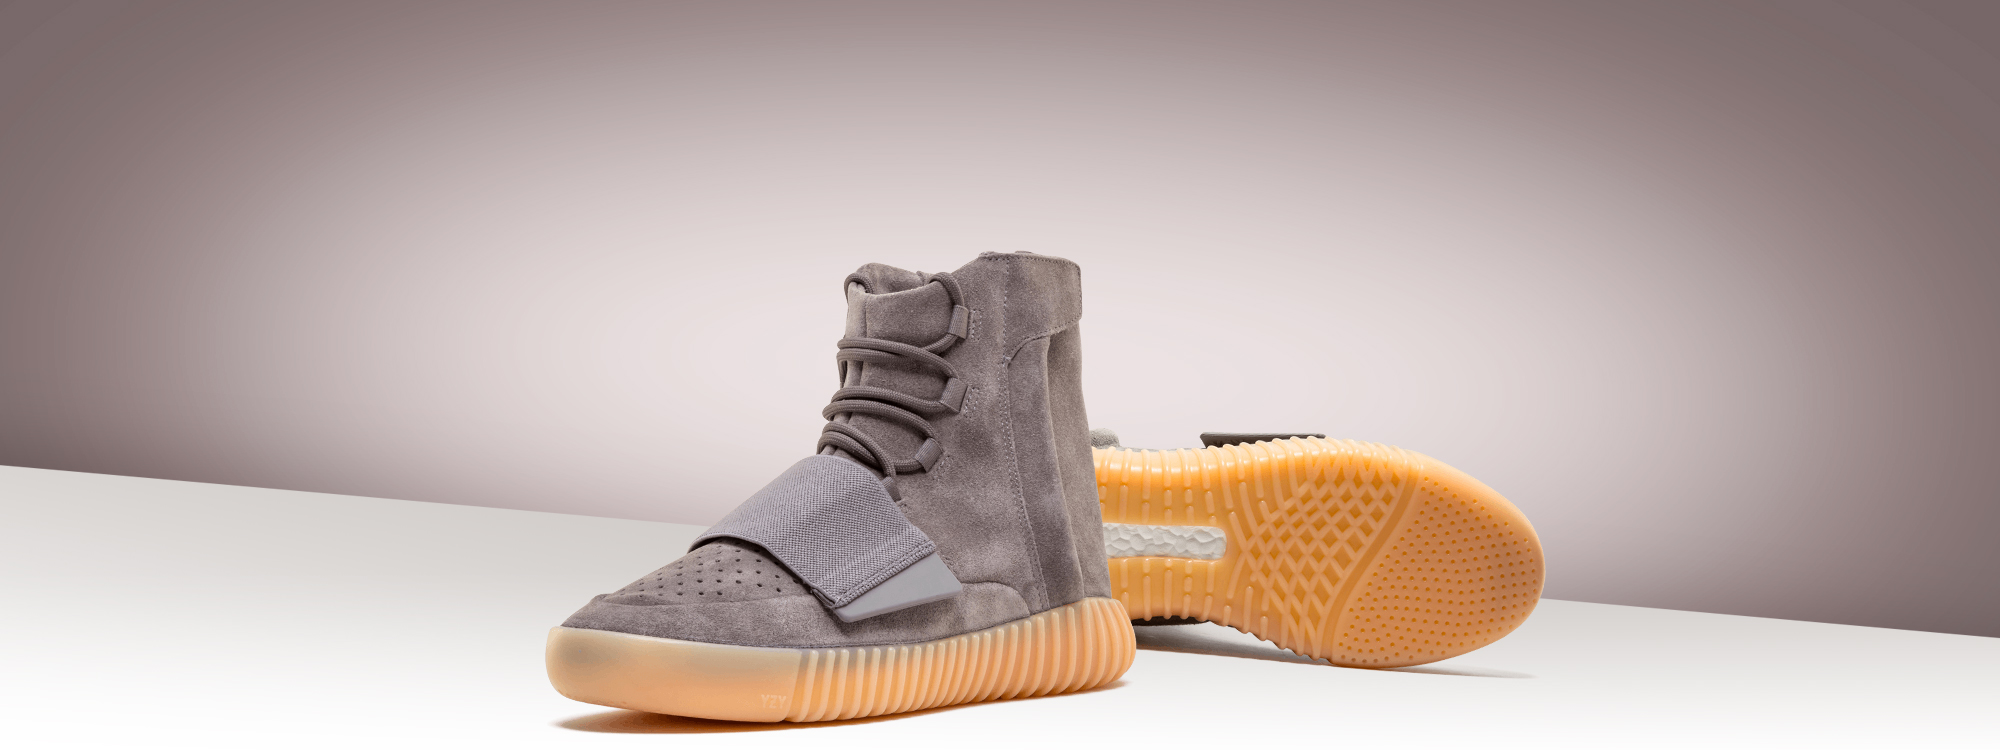  Yeezy Boost 750  Light Grey / Gum kids outfit